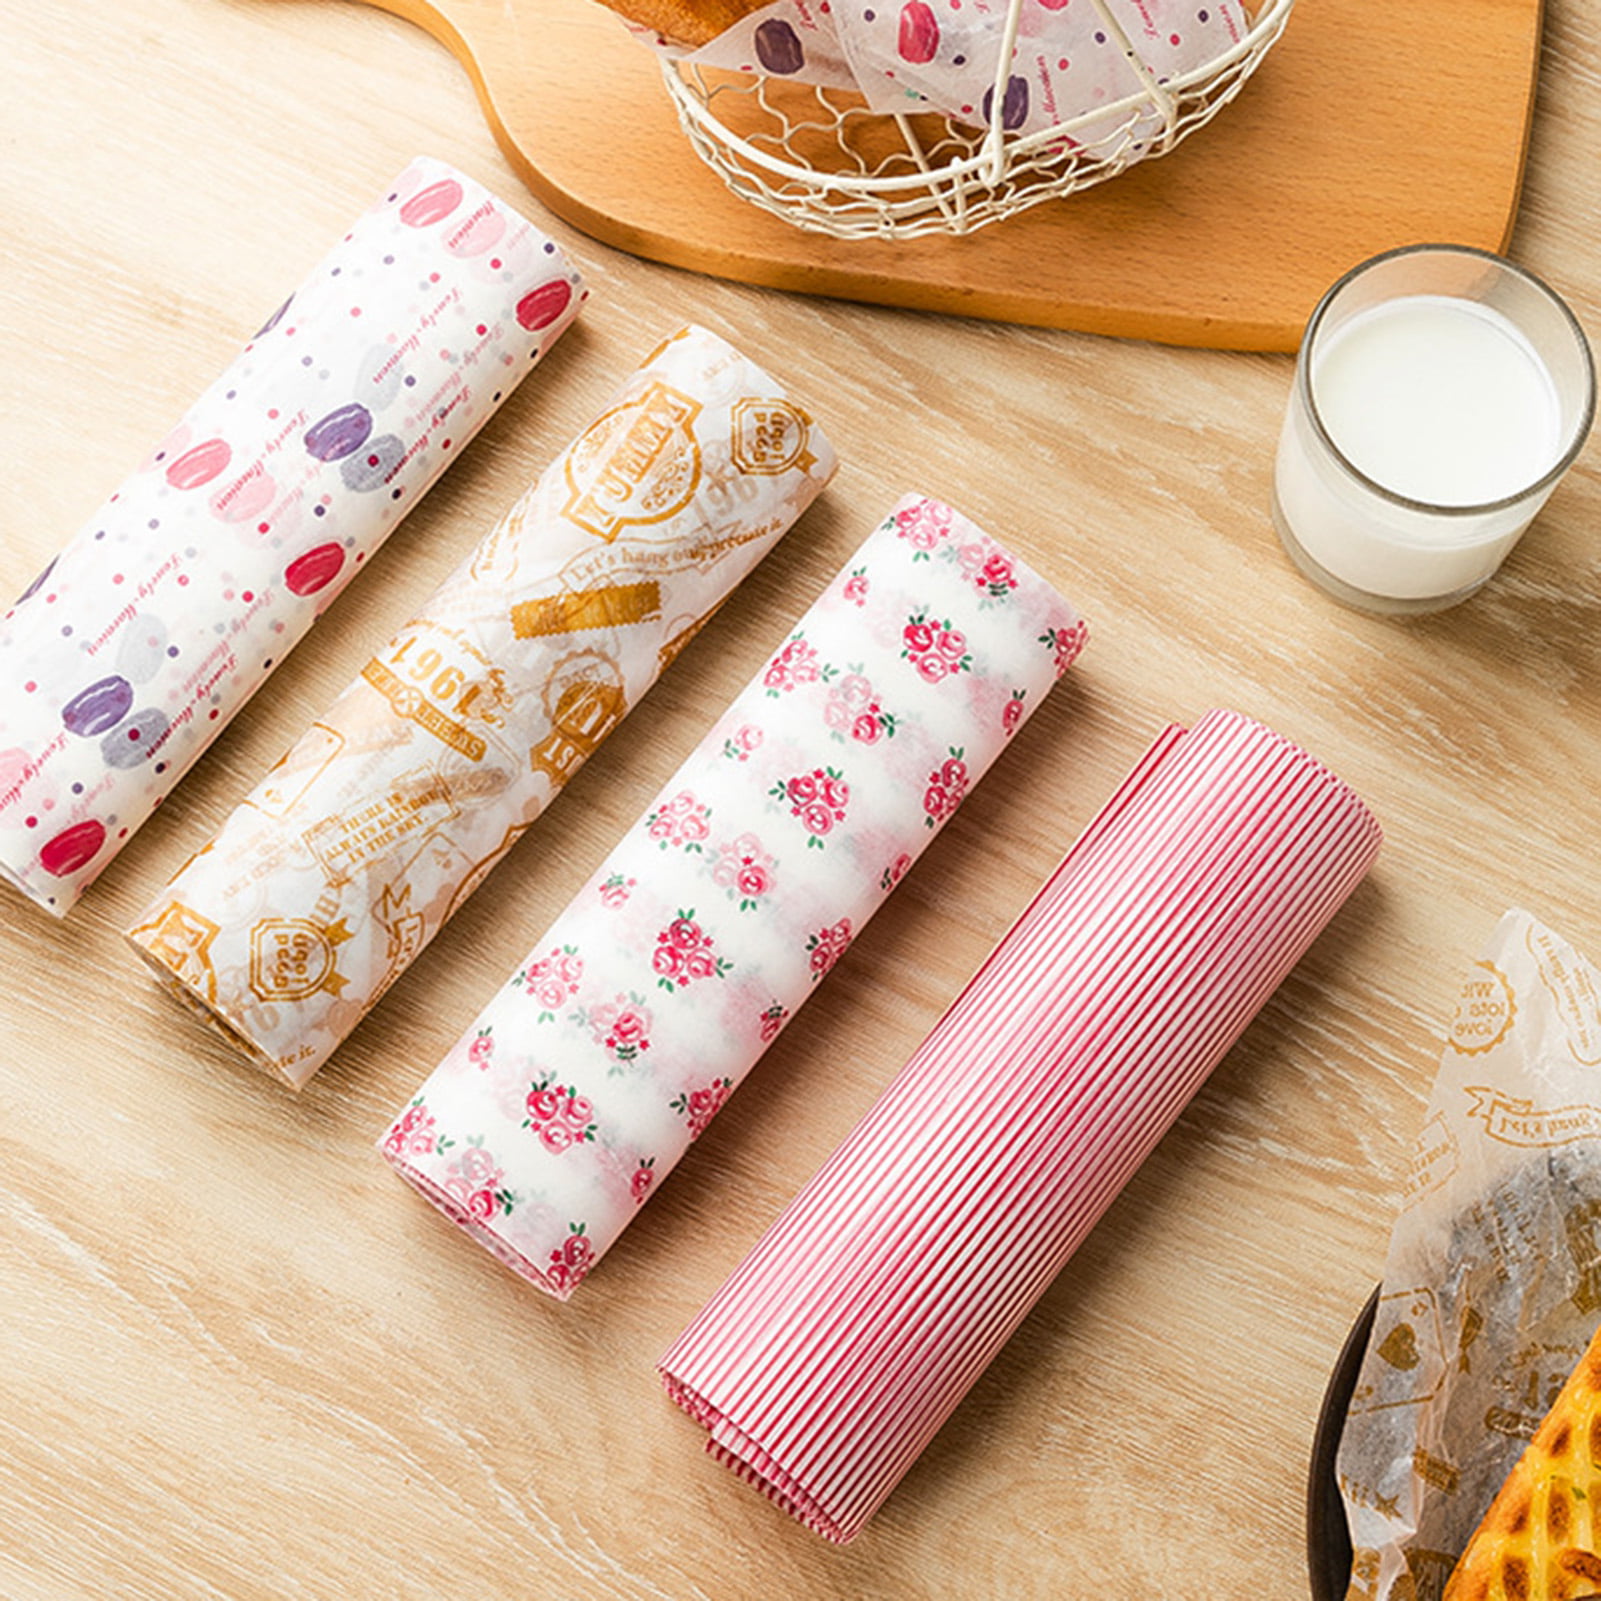 150 Pcs Easter Wax Paper for Food ,wrap Paper Sheets Sandwich Candy Cookies  Wraps for Easter with Eggs Rabbit Flowers Pattern Waterproof Liner for  Kitchen Handmade Food Easter Party Supplies